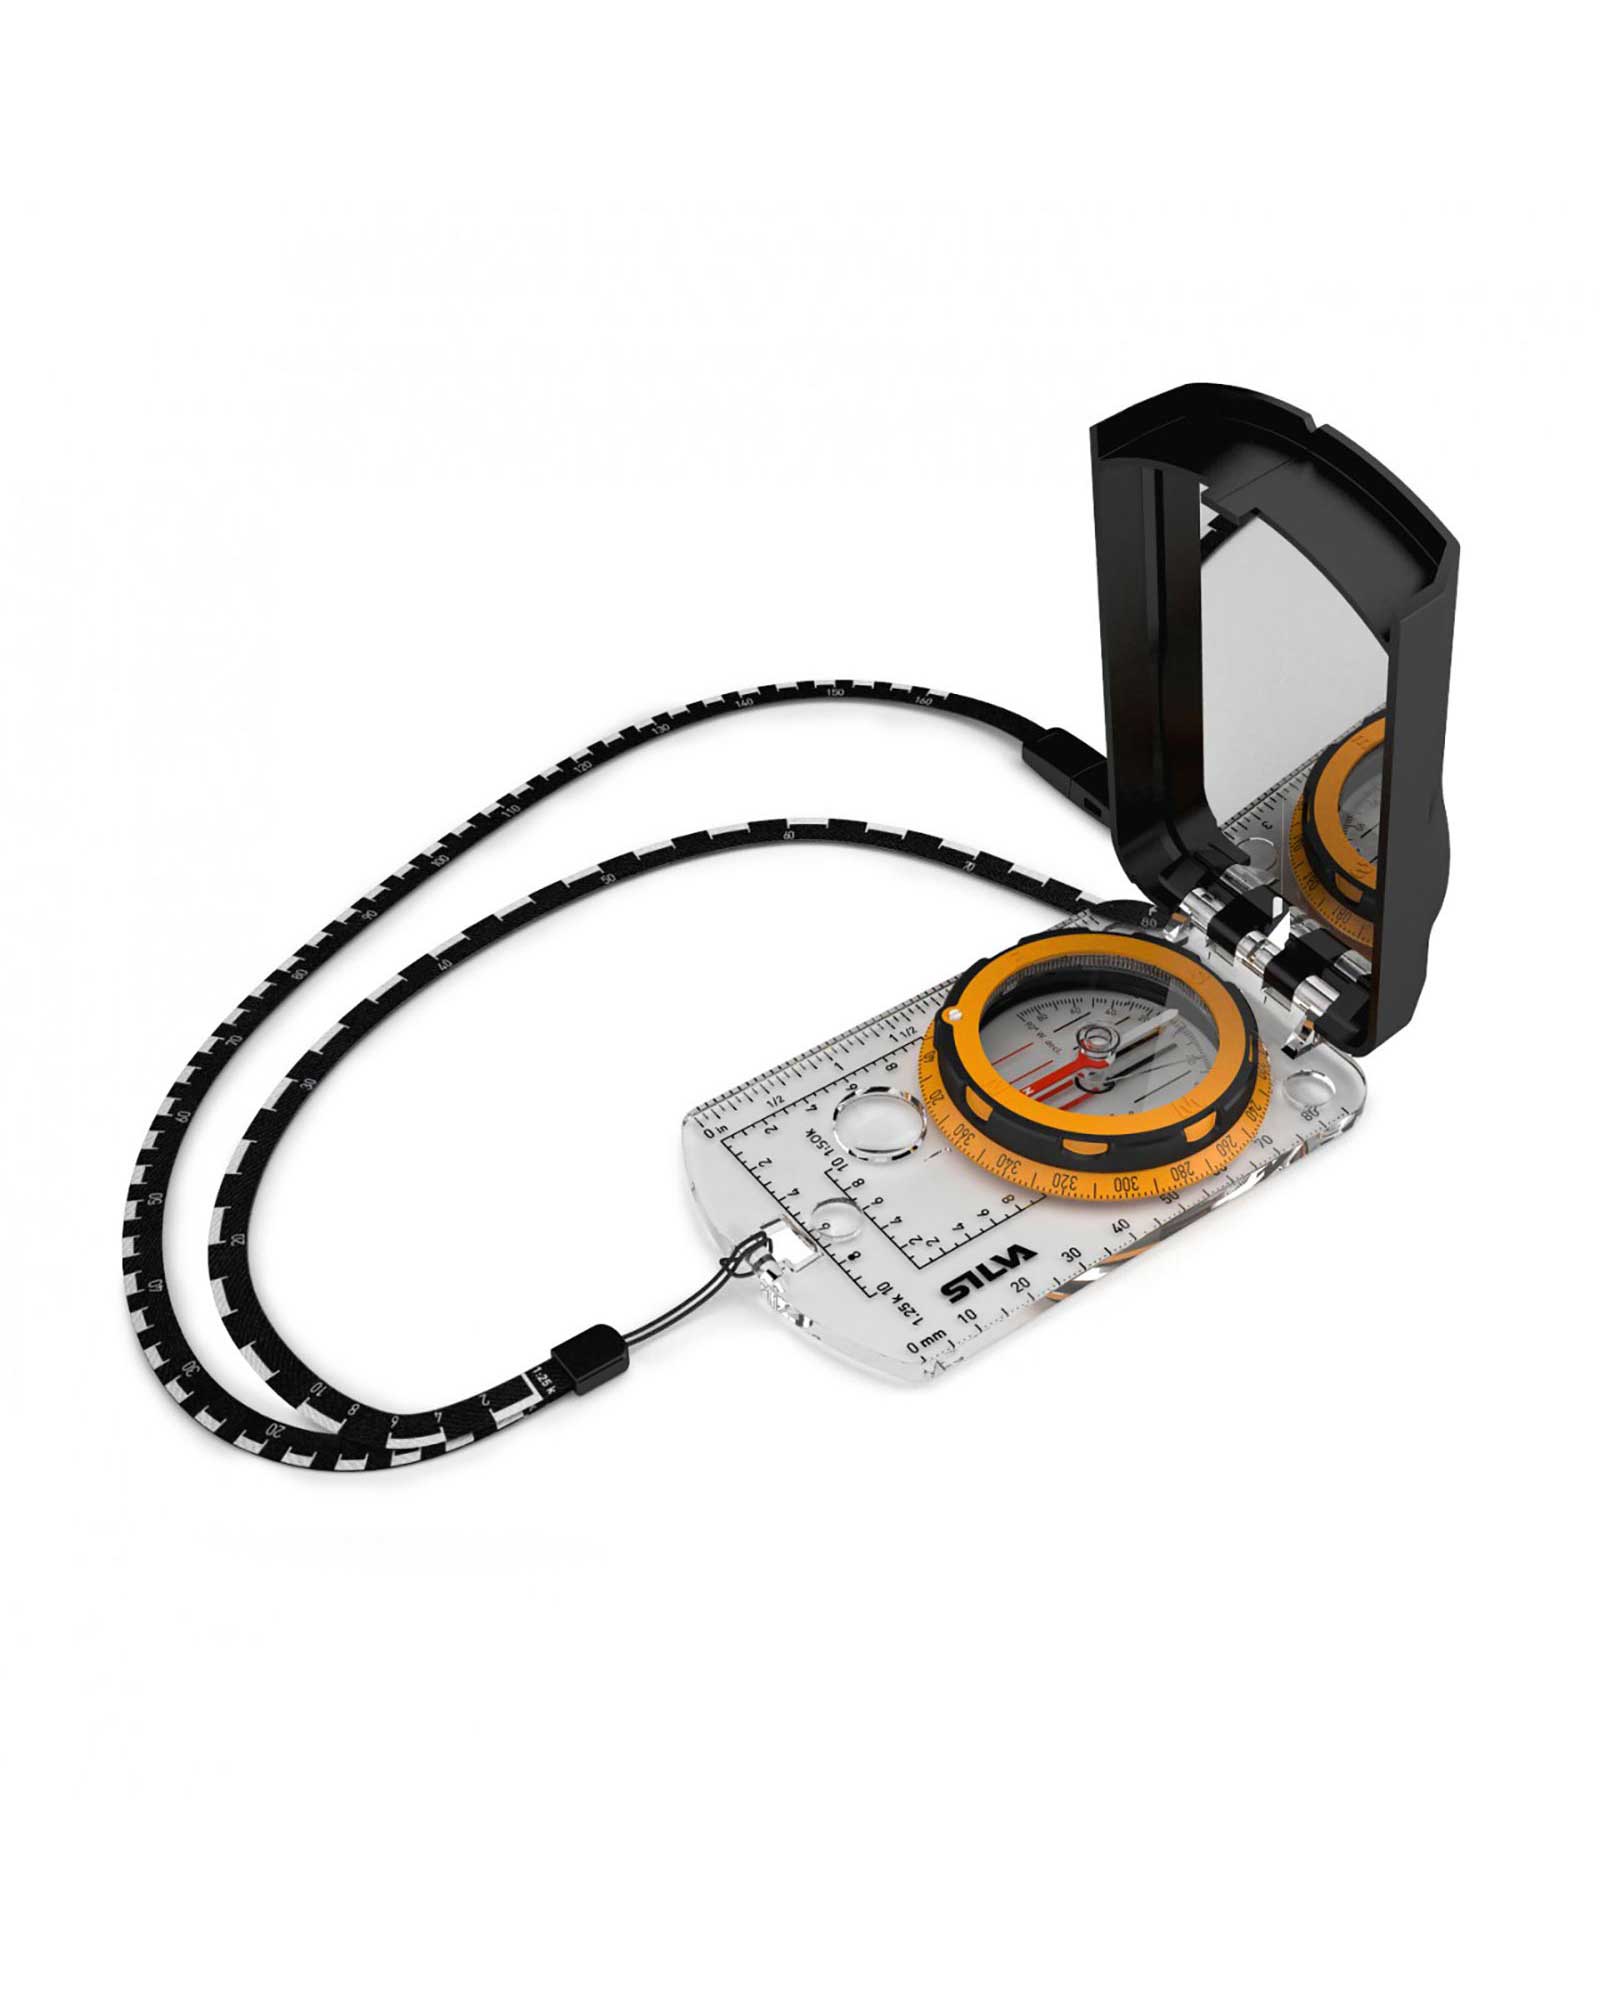 Silva Expedition S Compass 0